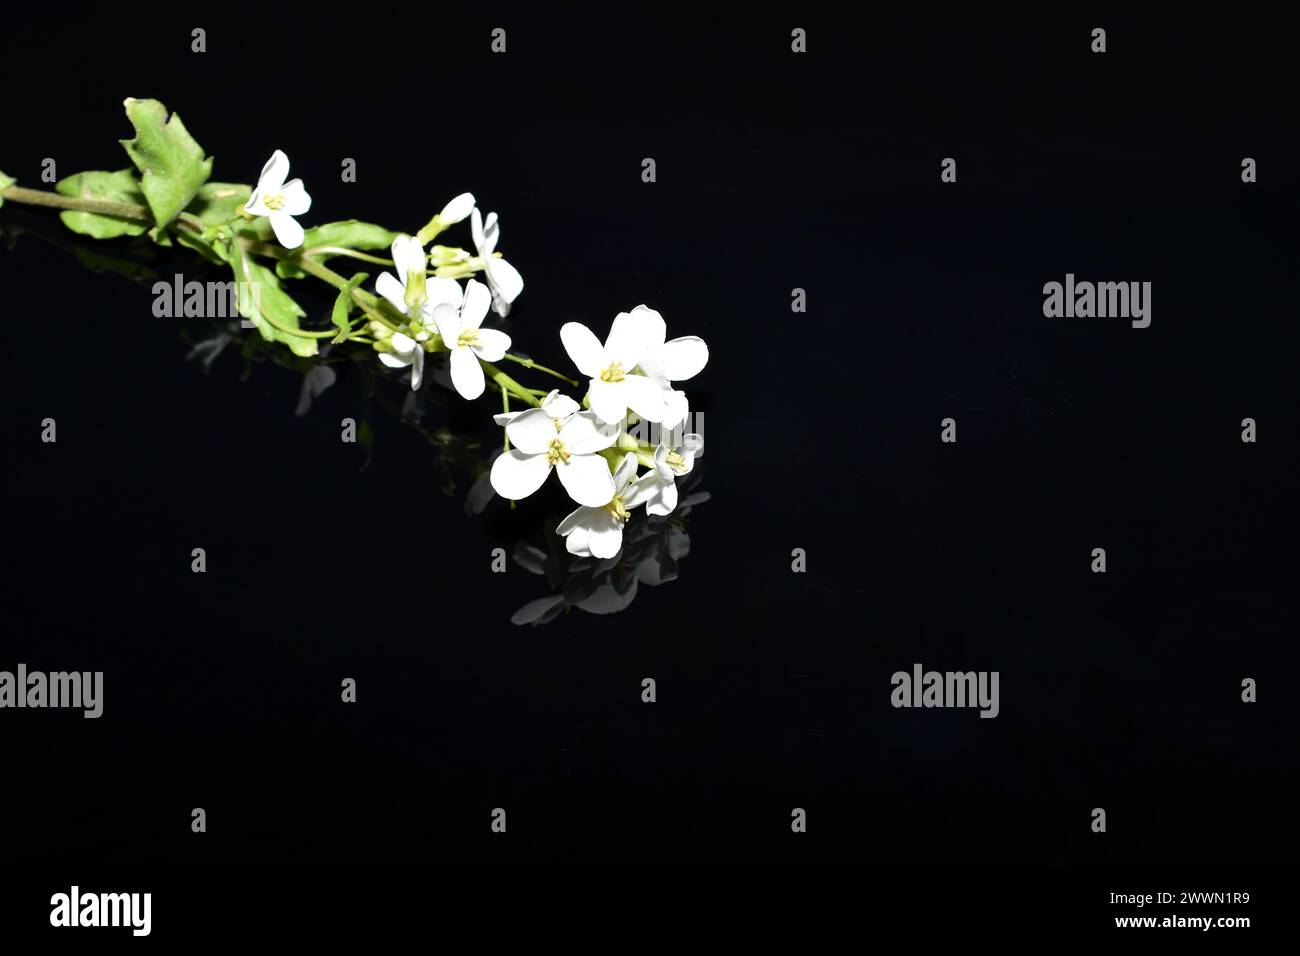 Branch of garden Arabis with white flowers on a black background, close-up. Stock Photo